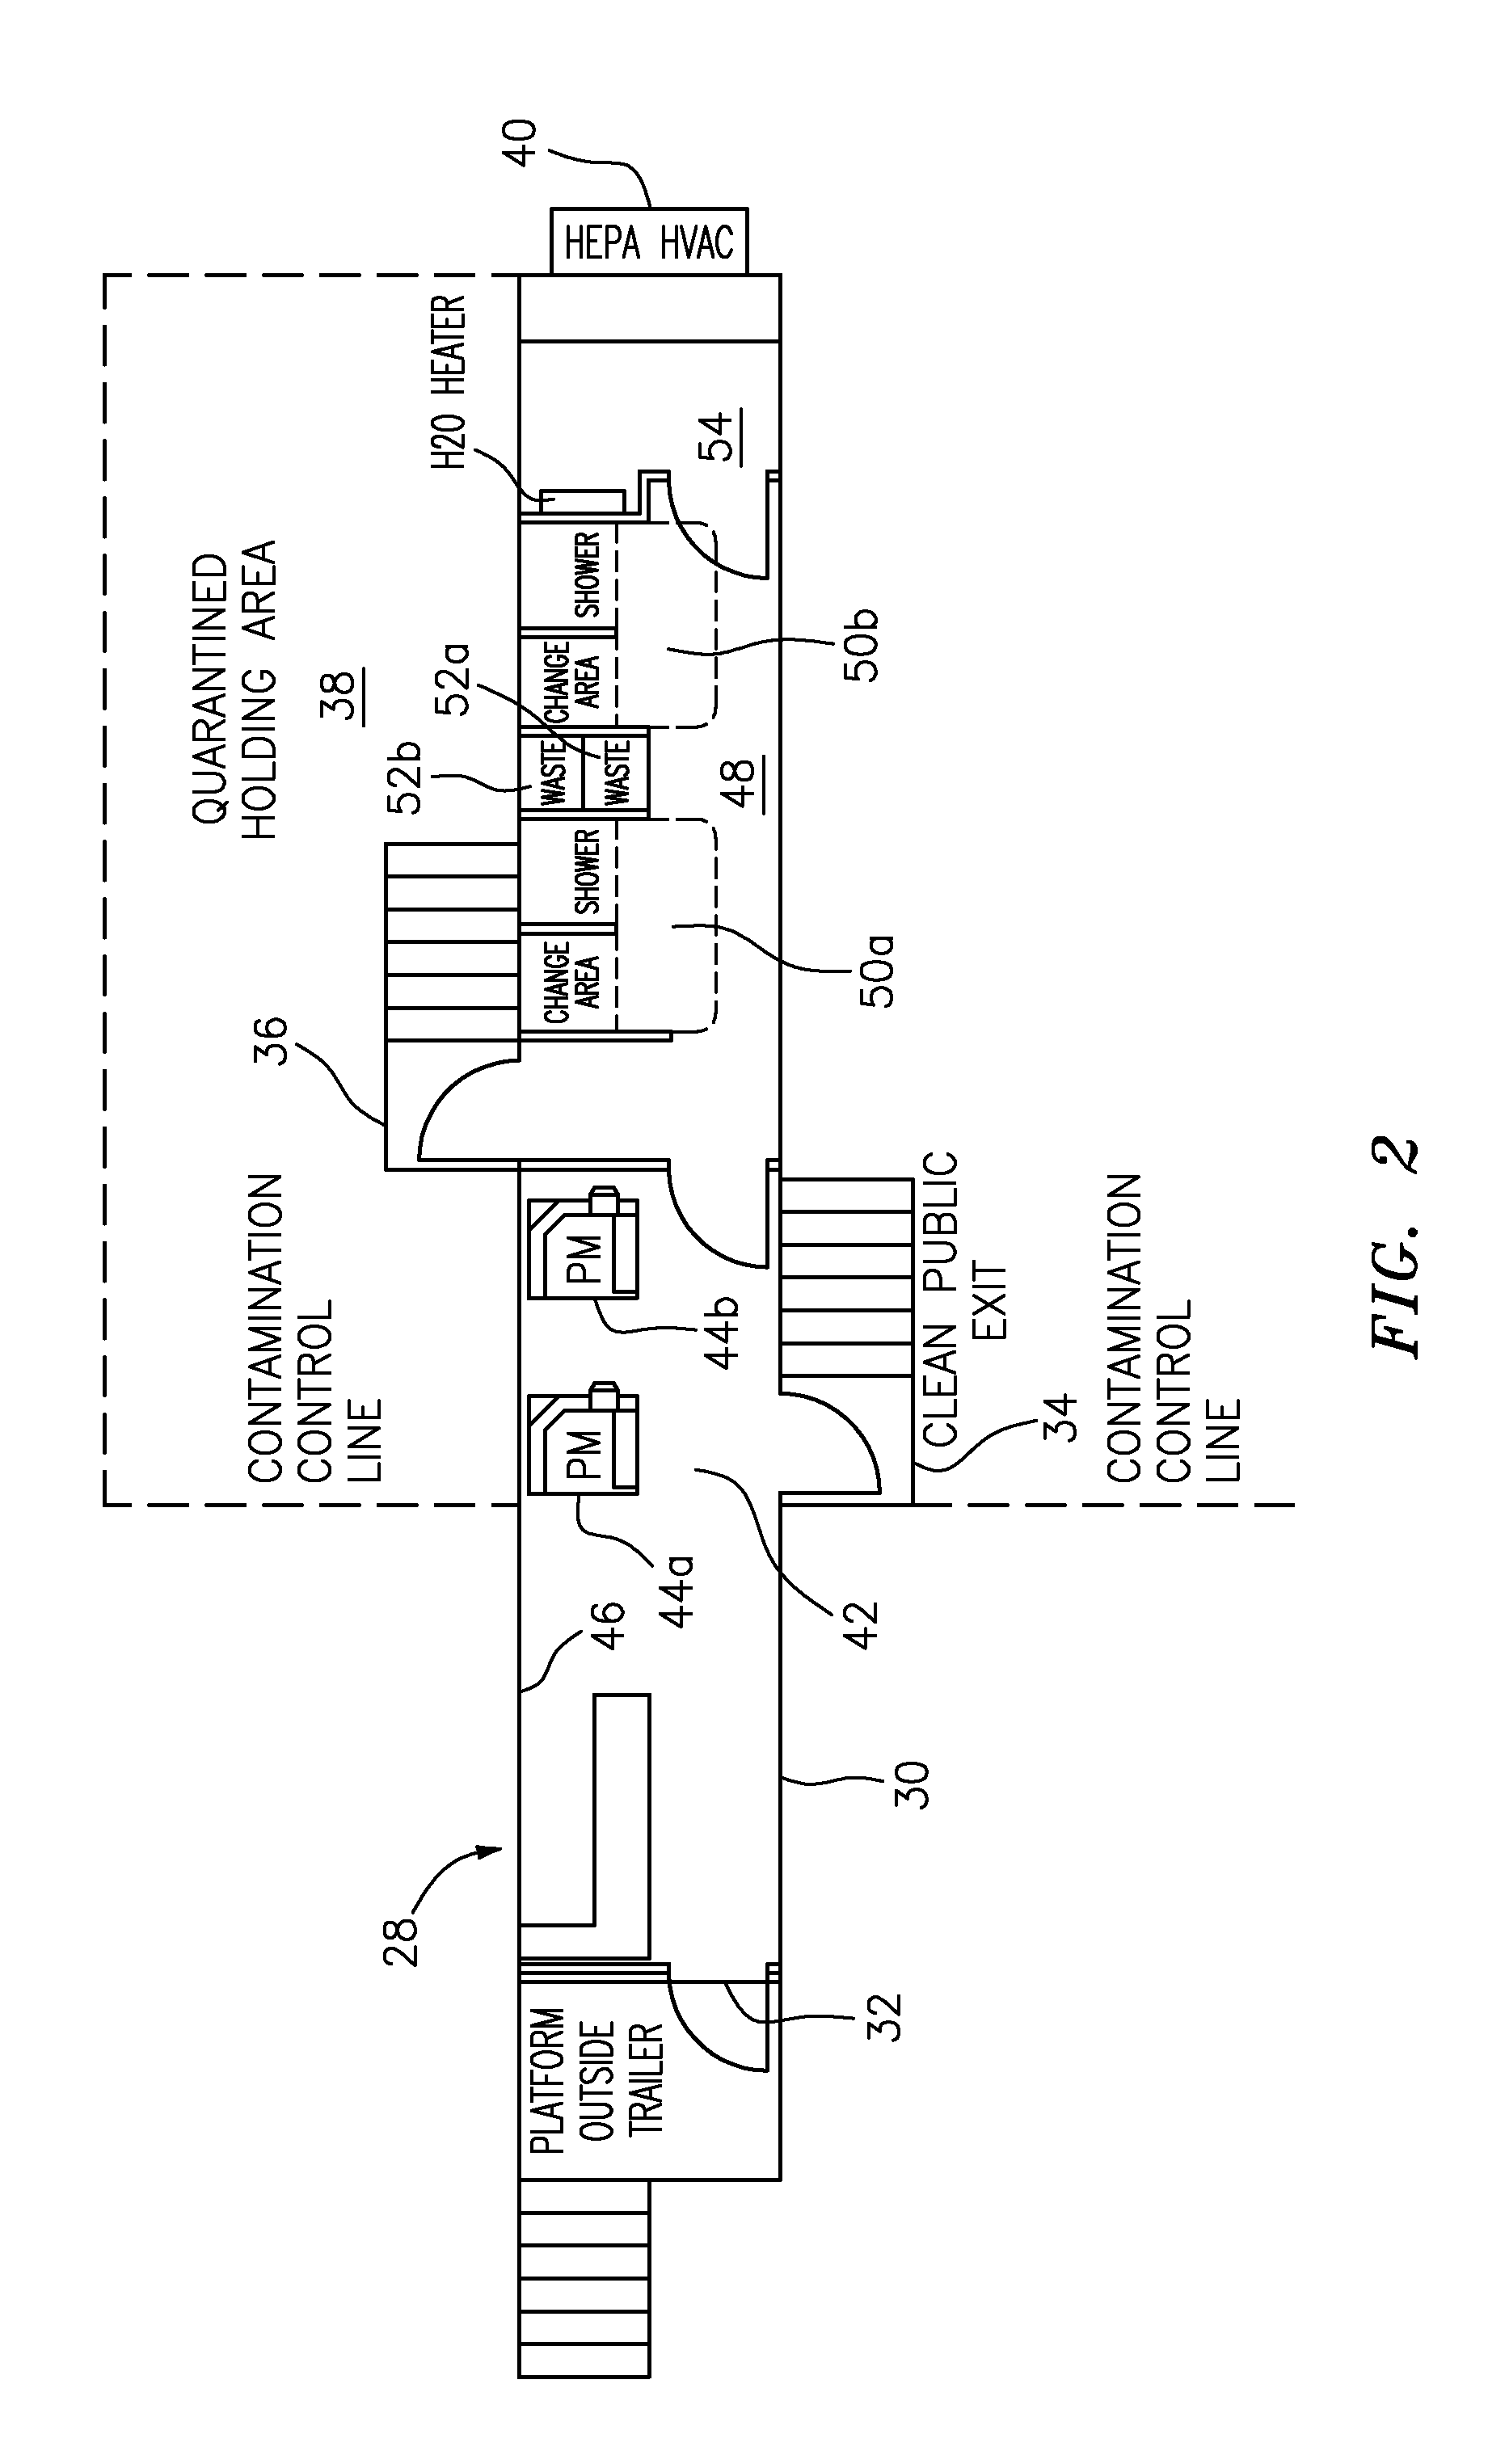 Mobile-monitoring and/or decontamination unit structure